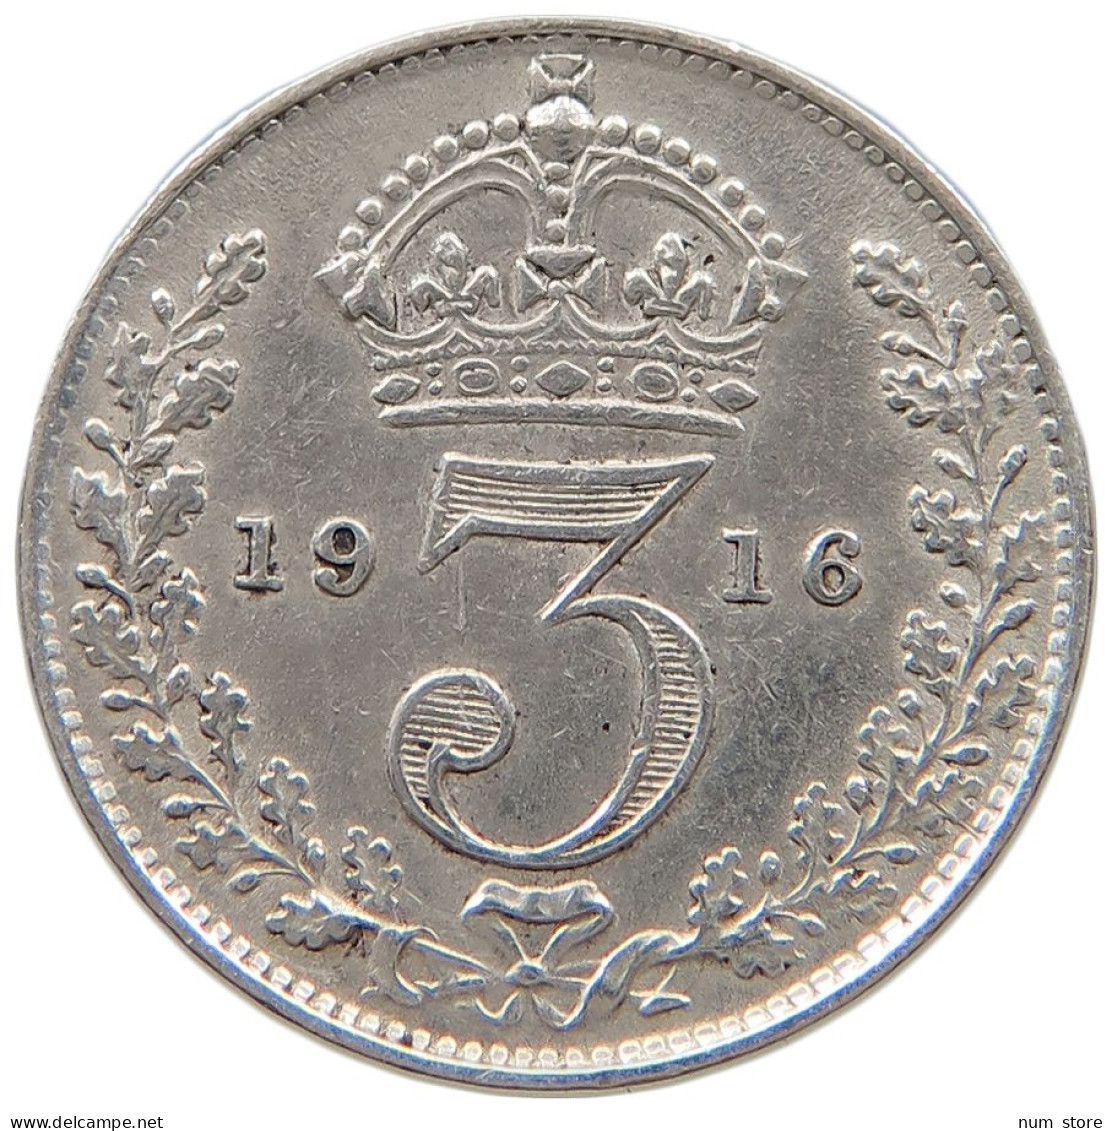 GREAT BRITAIN THREEPENCE 1916 George V. (1910-1936) #a052 0467 - F. 3 Pence